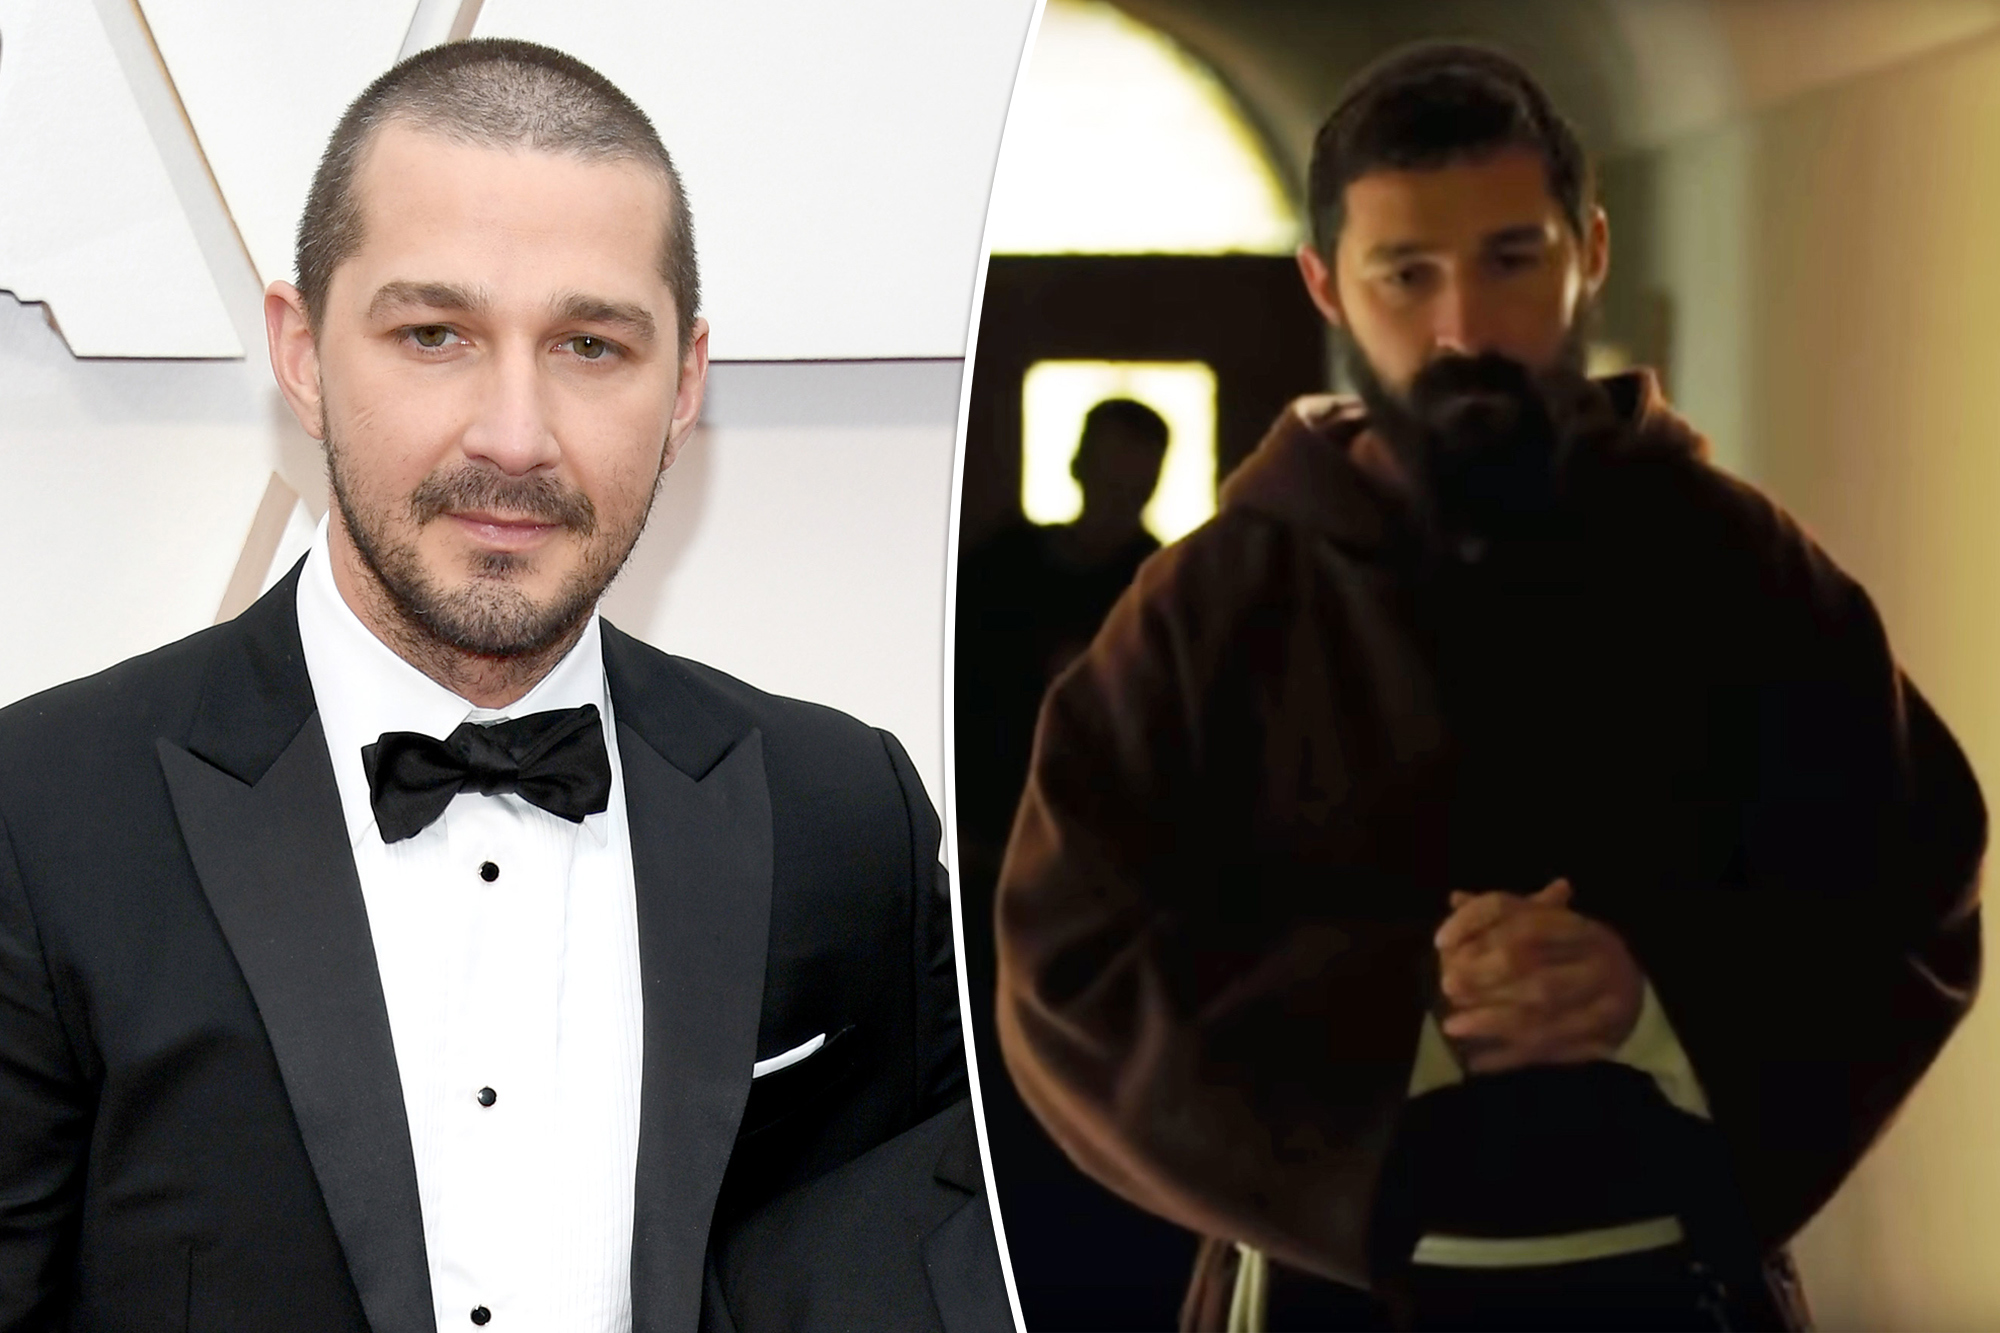 Shia LaBeouf reportedly confirmed into Catholic Church ‘I want to